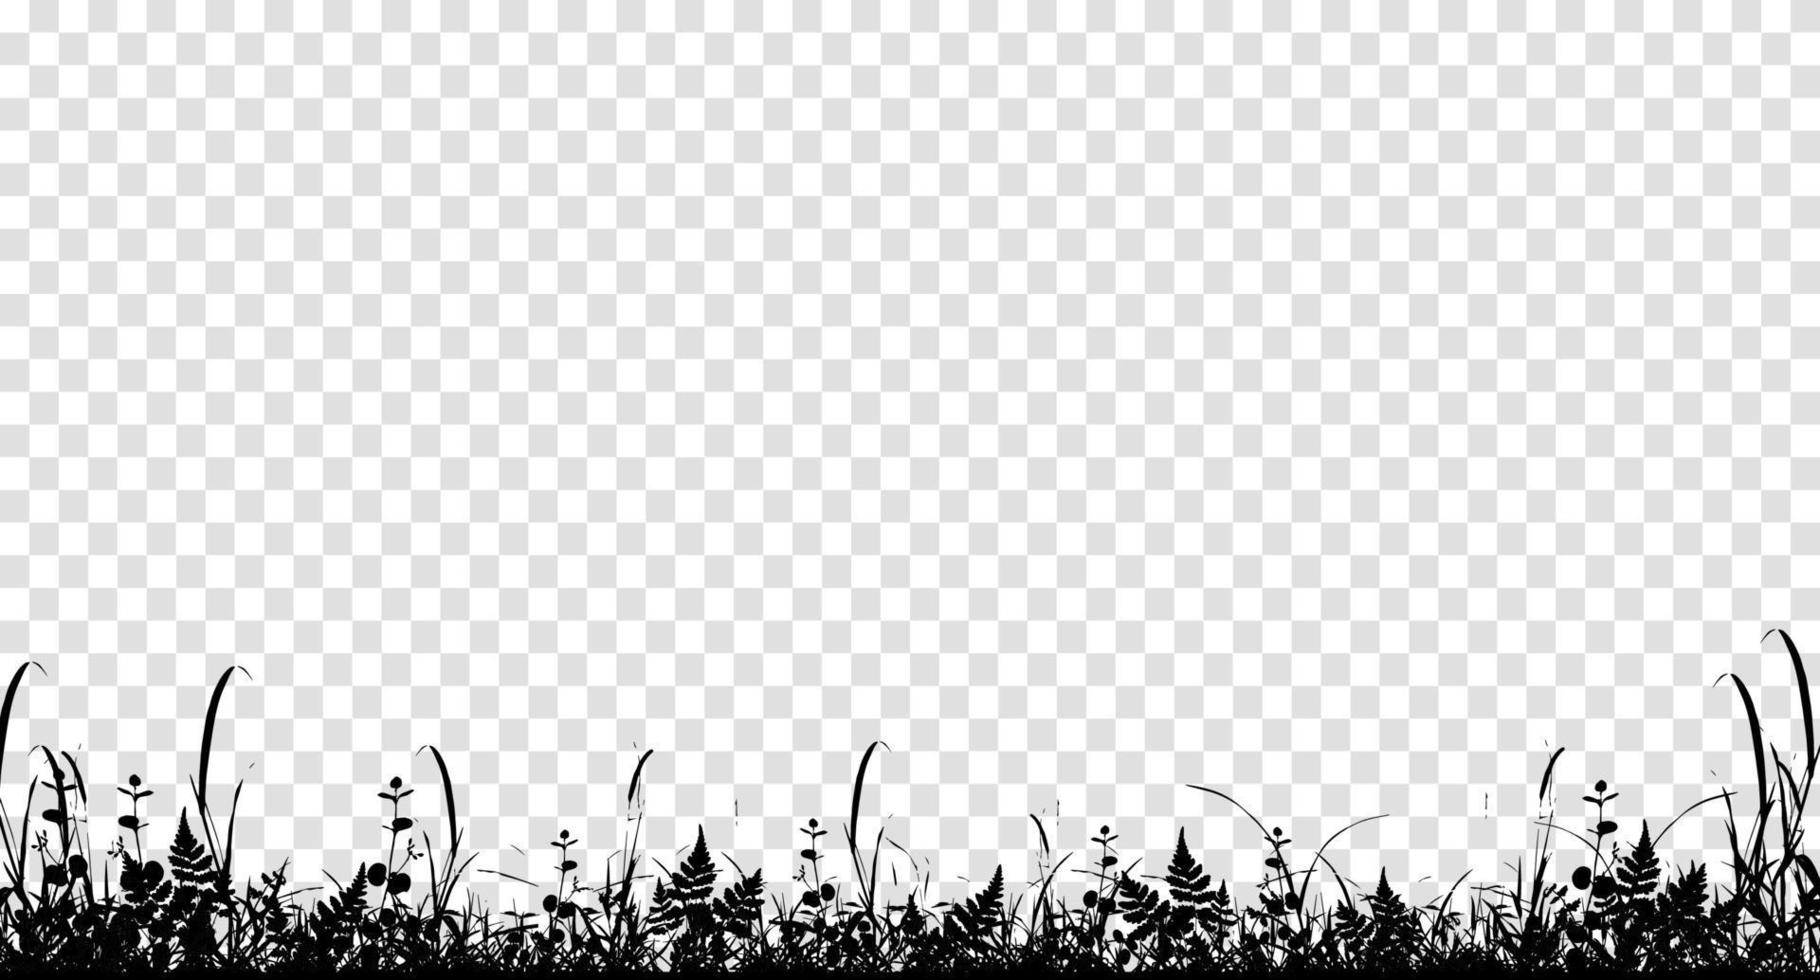 Grass natural silhouette as background vector